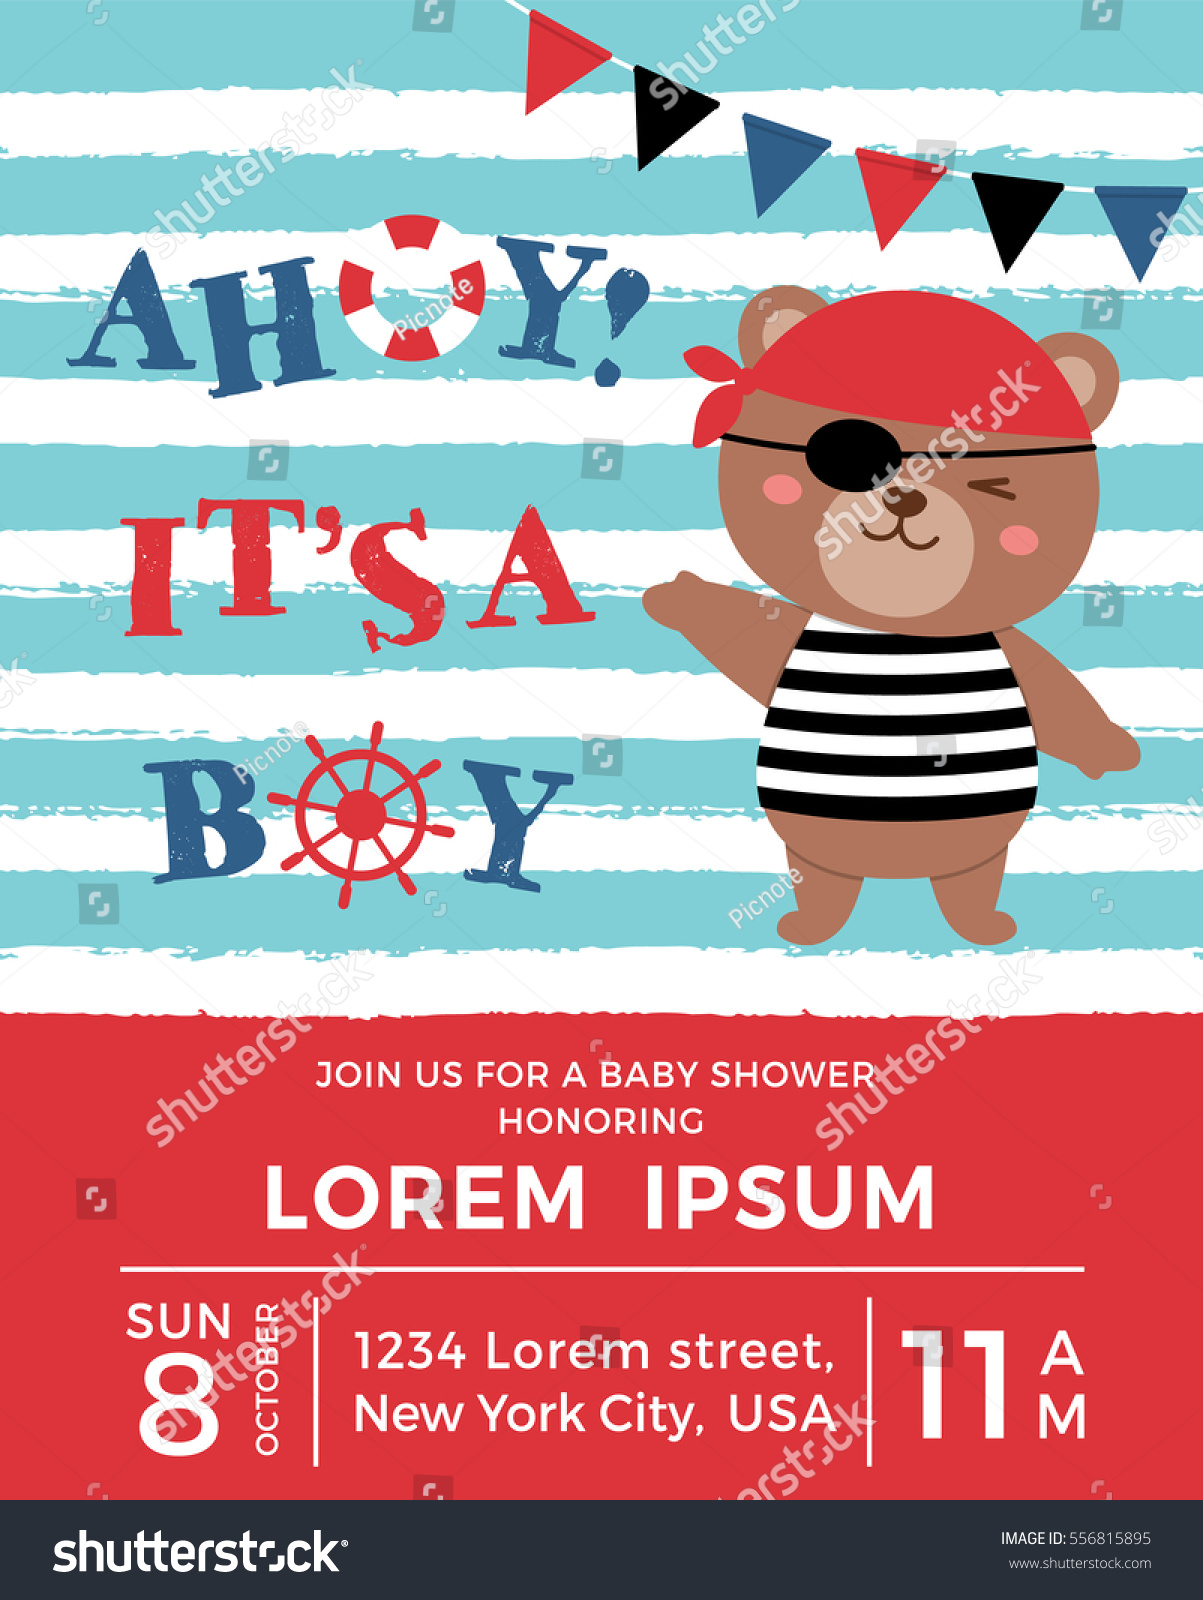 SVG of Cute pirate bear cartoon illustration with text Ahoy it's a boy for baby shower invitation card design template svg